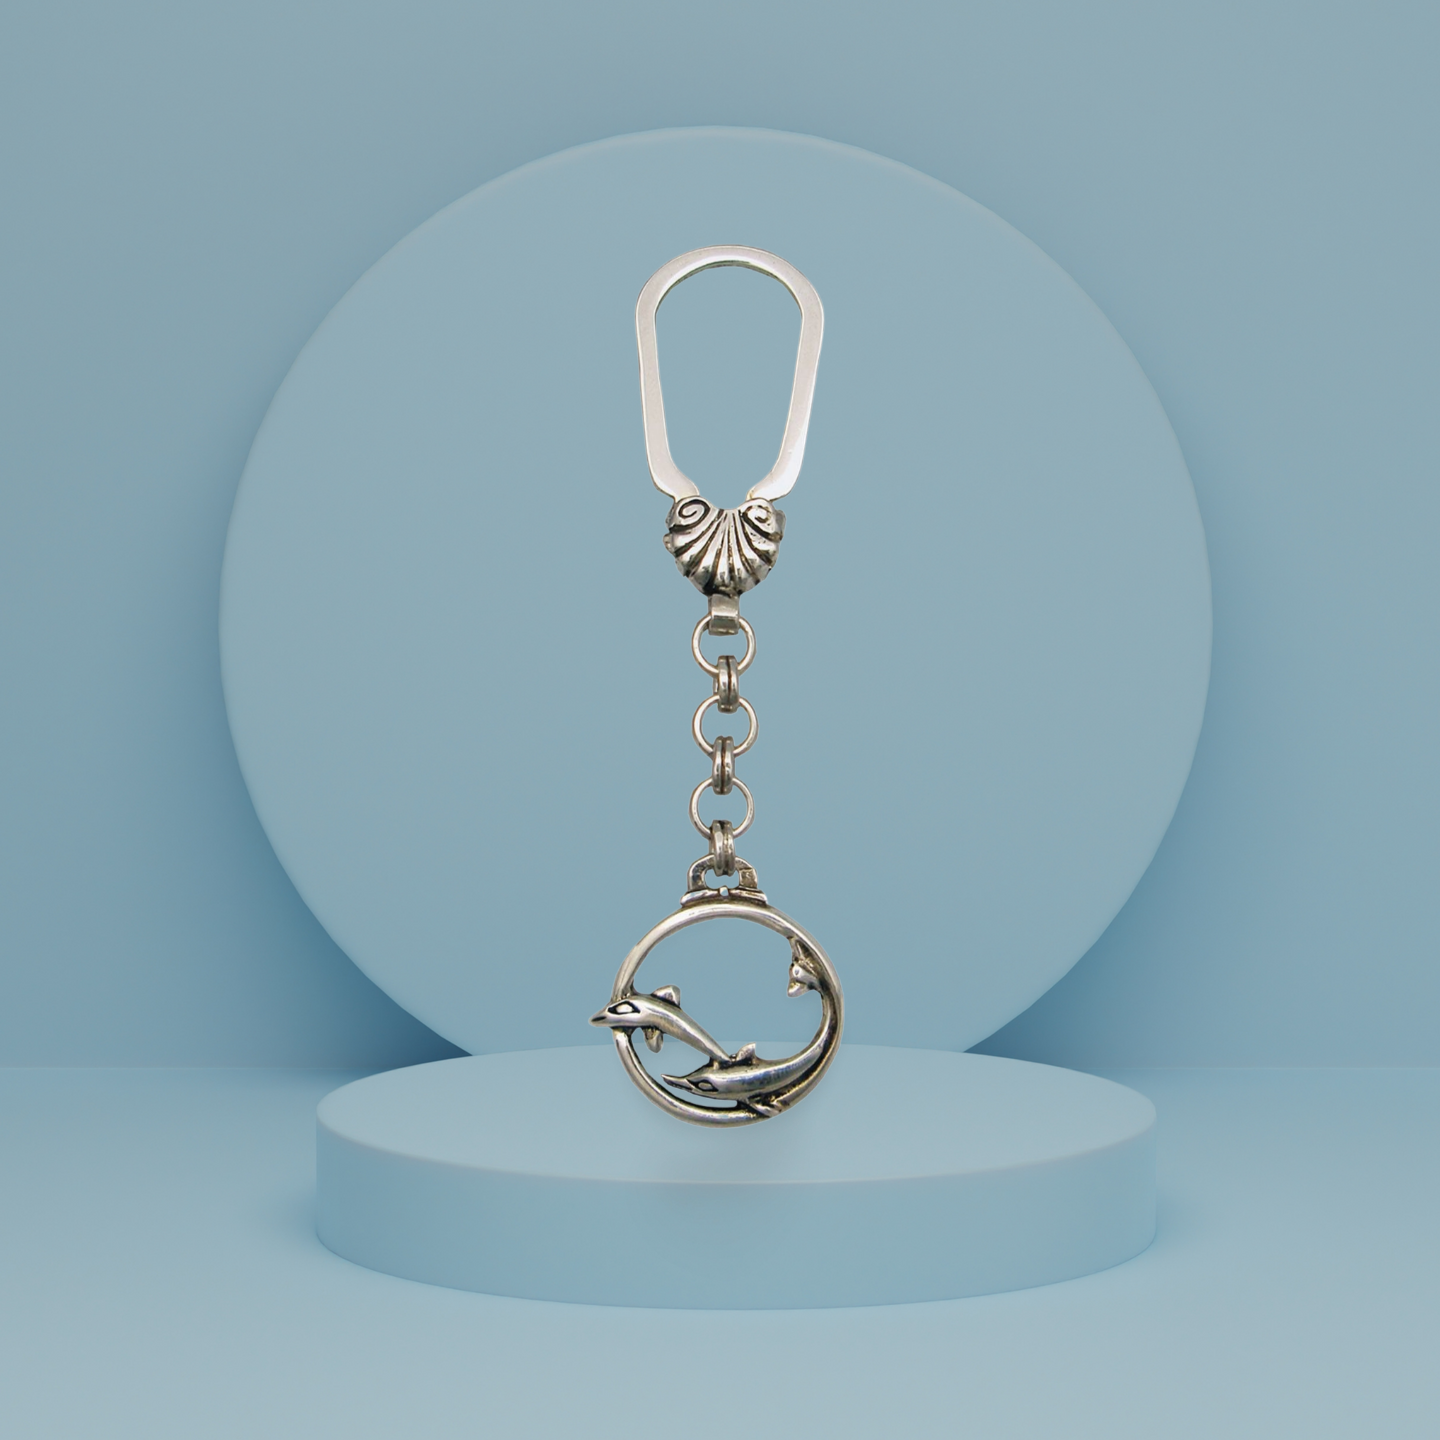 Minoan Dolphins Key ring in sterling silver, silver keychain, men's gift, handmade keychain (MP-08)